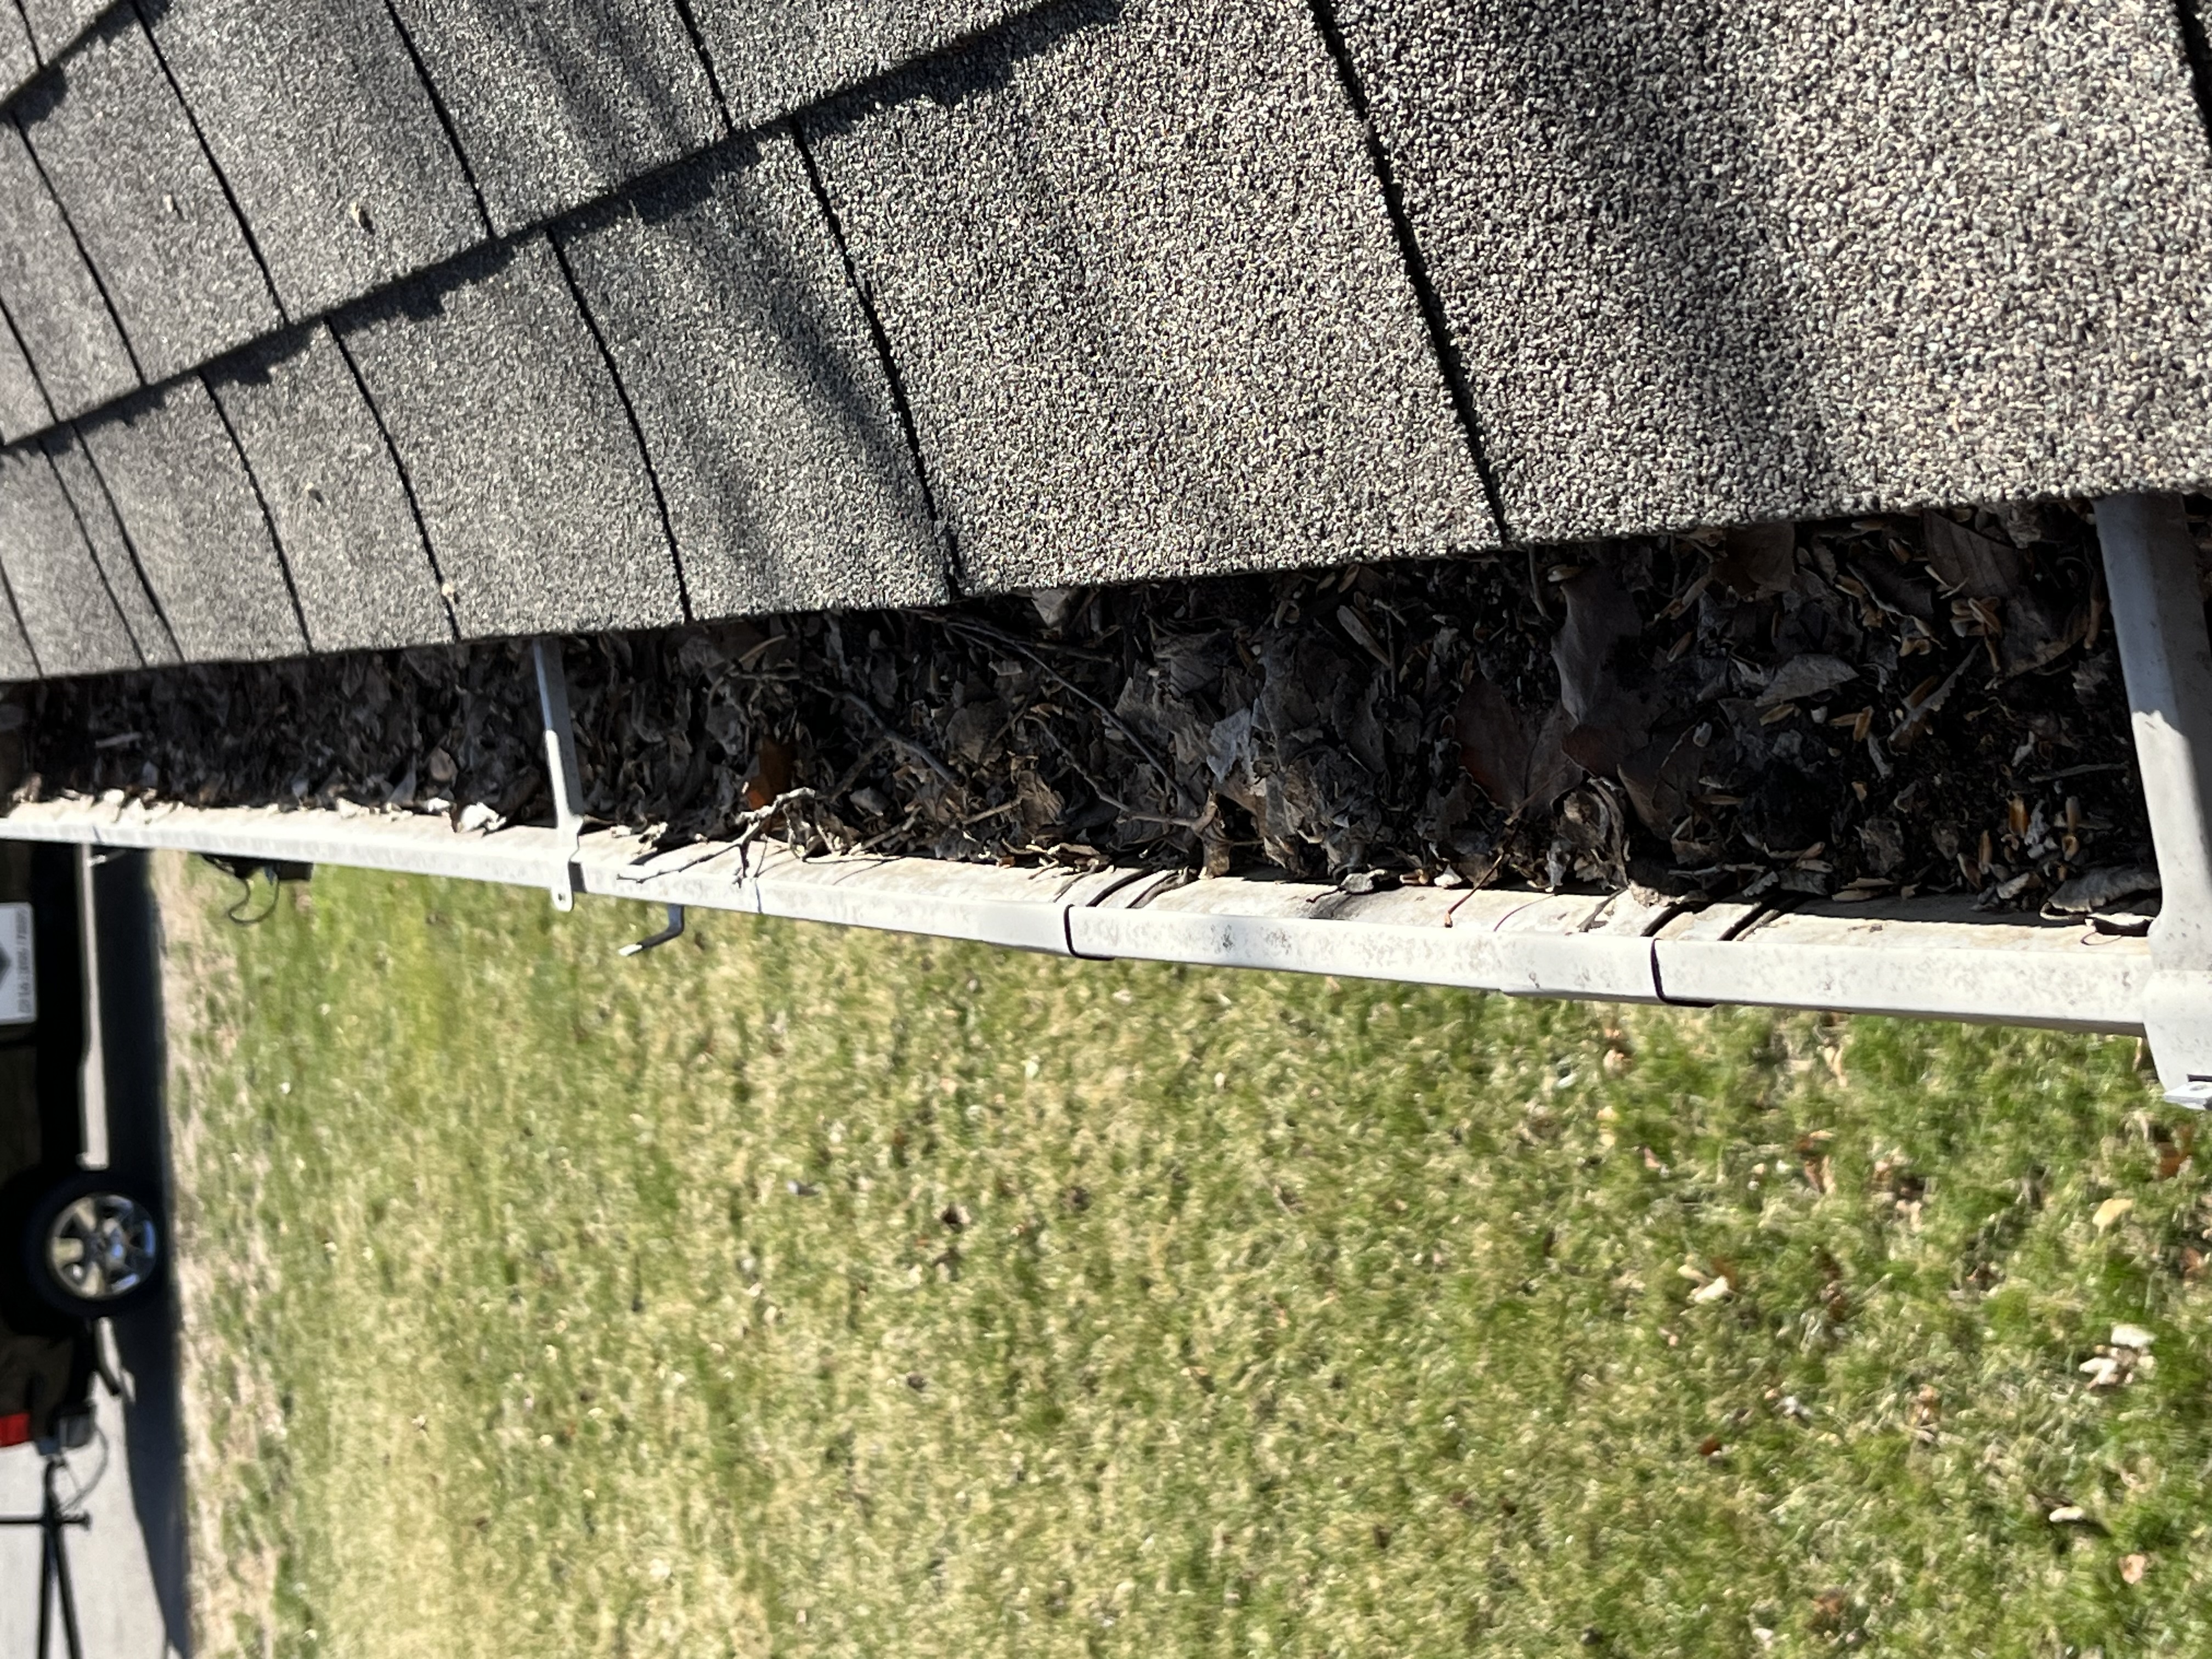 Gutter Cleaning in Bel-Aire Kansas 67226 area code. 